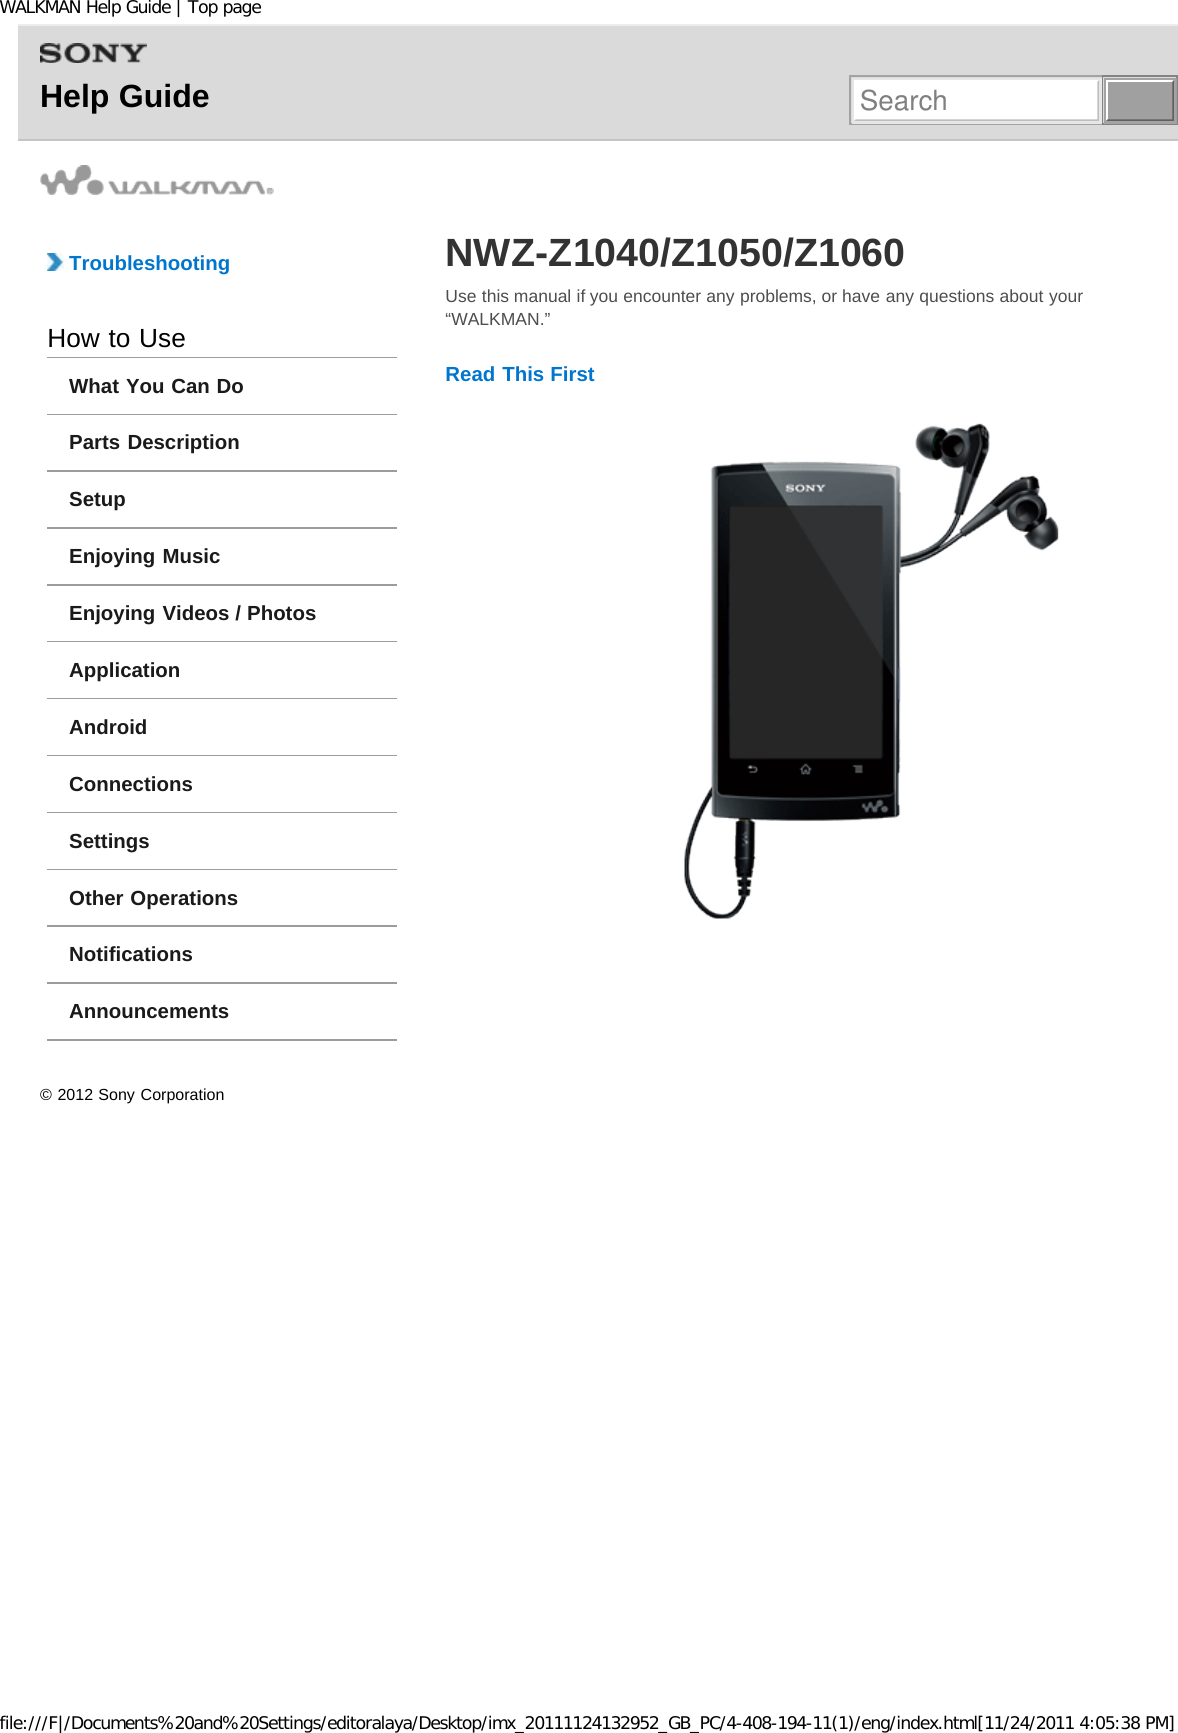 Page 1 of Sony Group NWZZ1000 Digital Media Player User Manual WALKMAN Help Guide   Top page